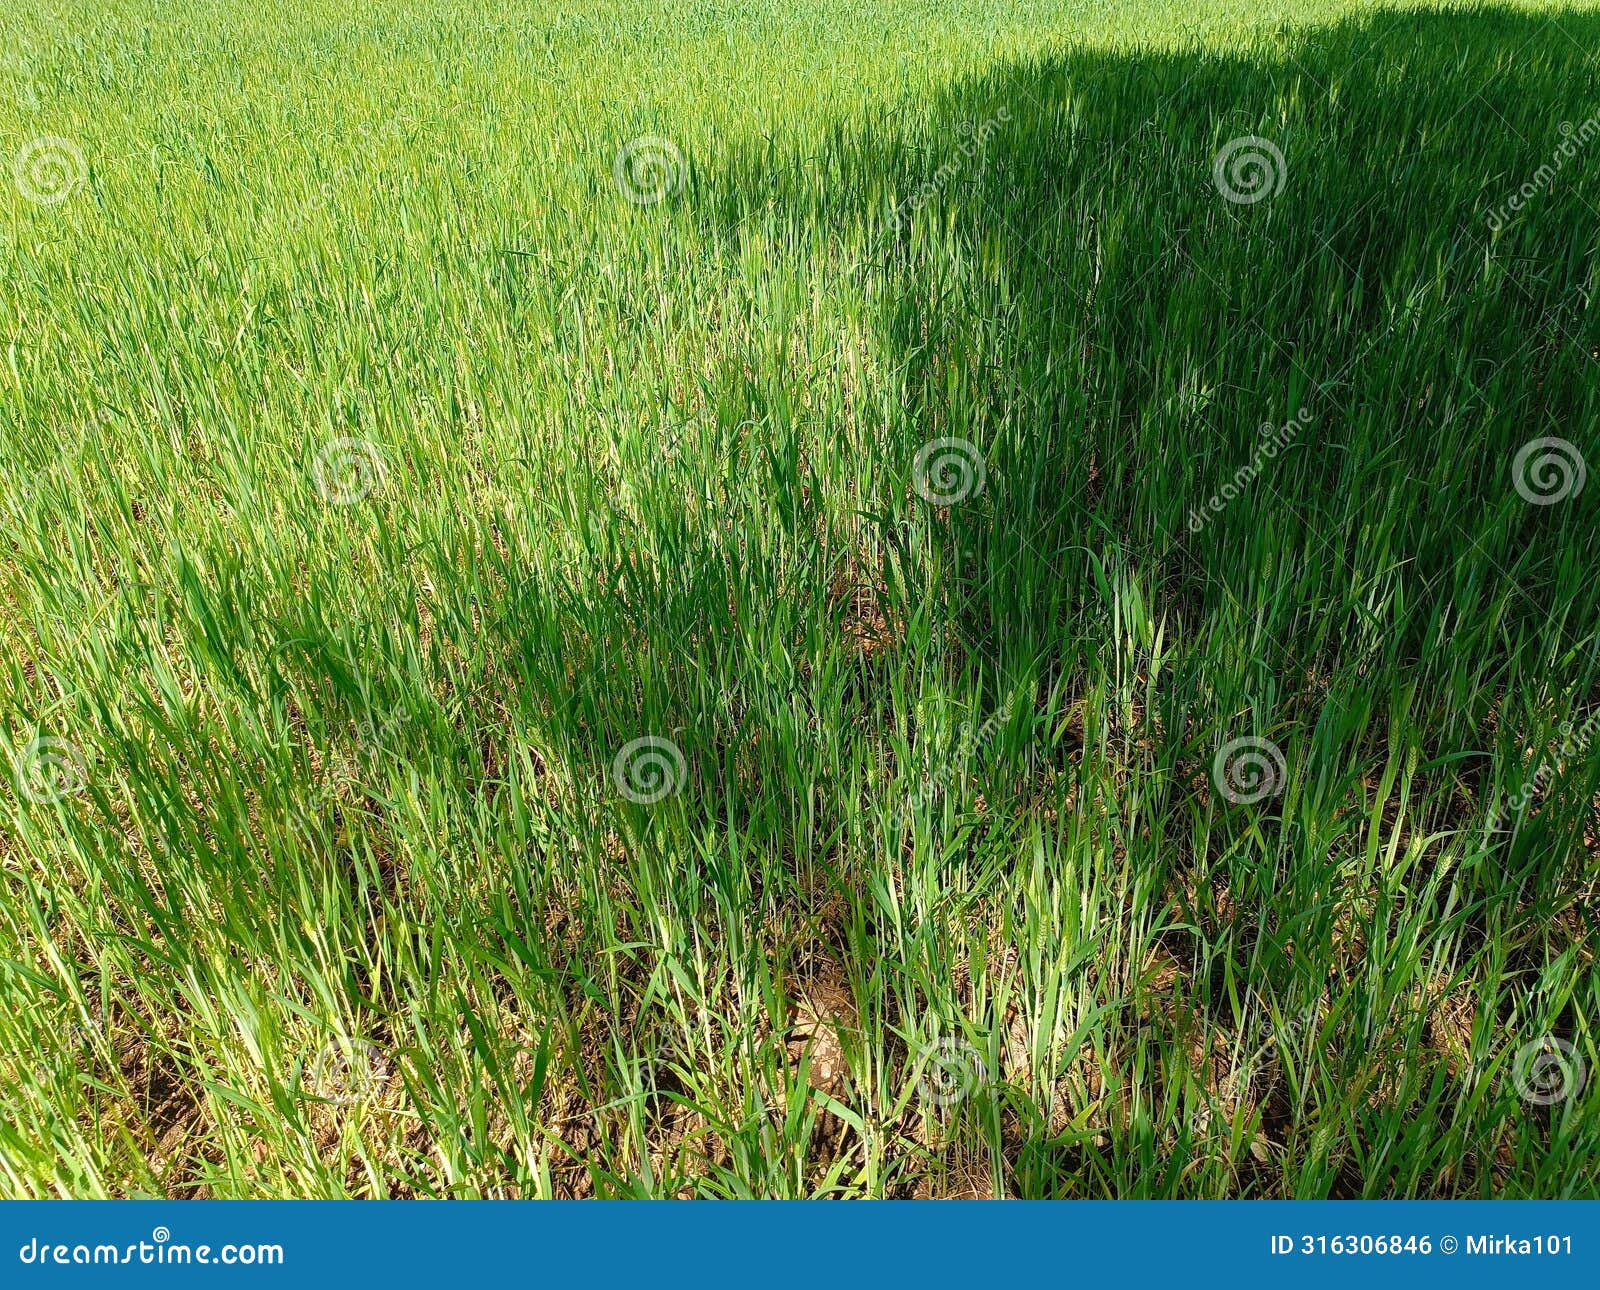 small green ears of wheat with sunny areas and shaded areas